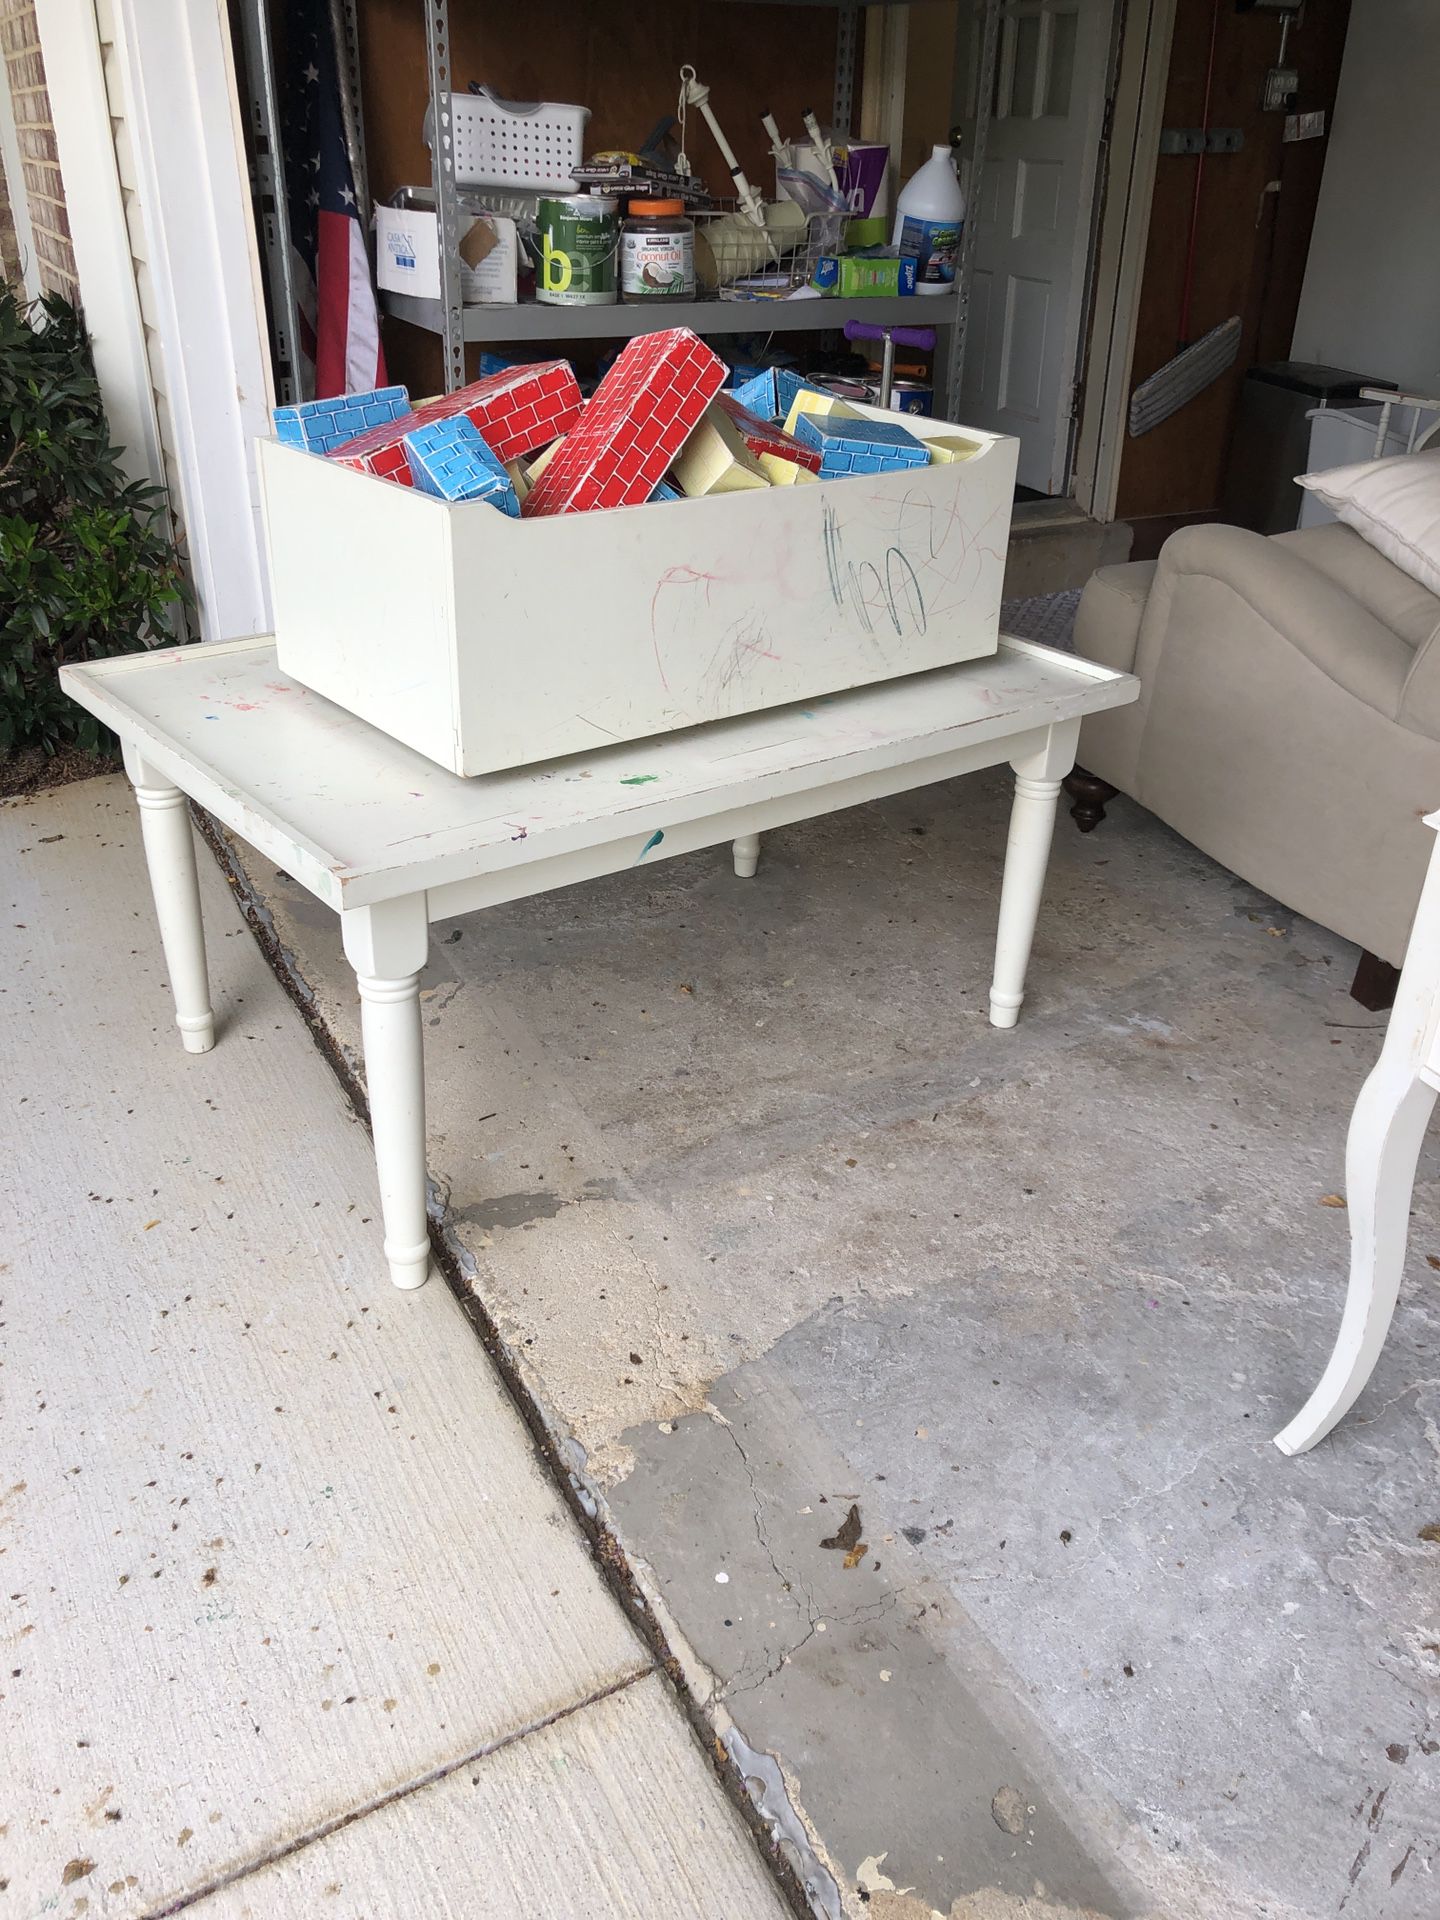 Pottery barn table and toy box